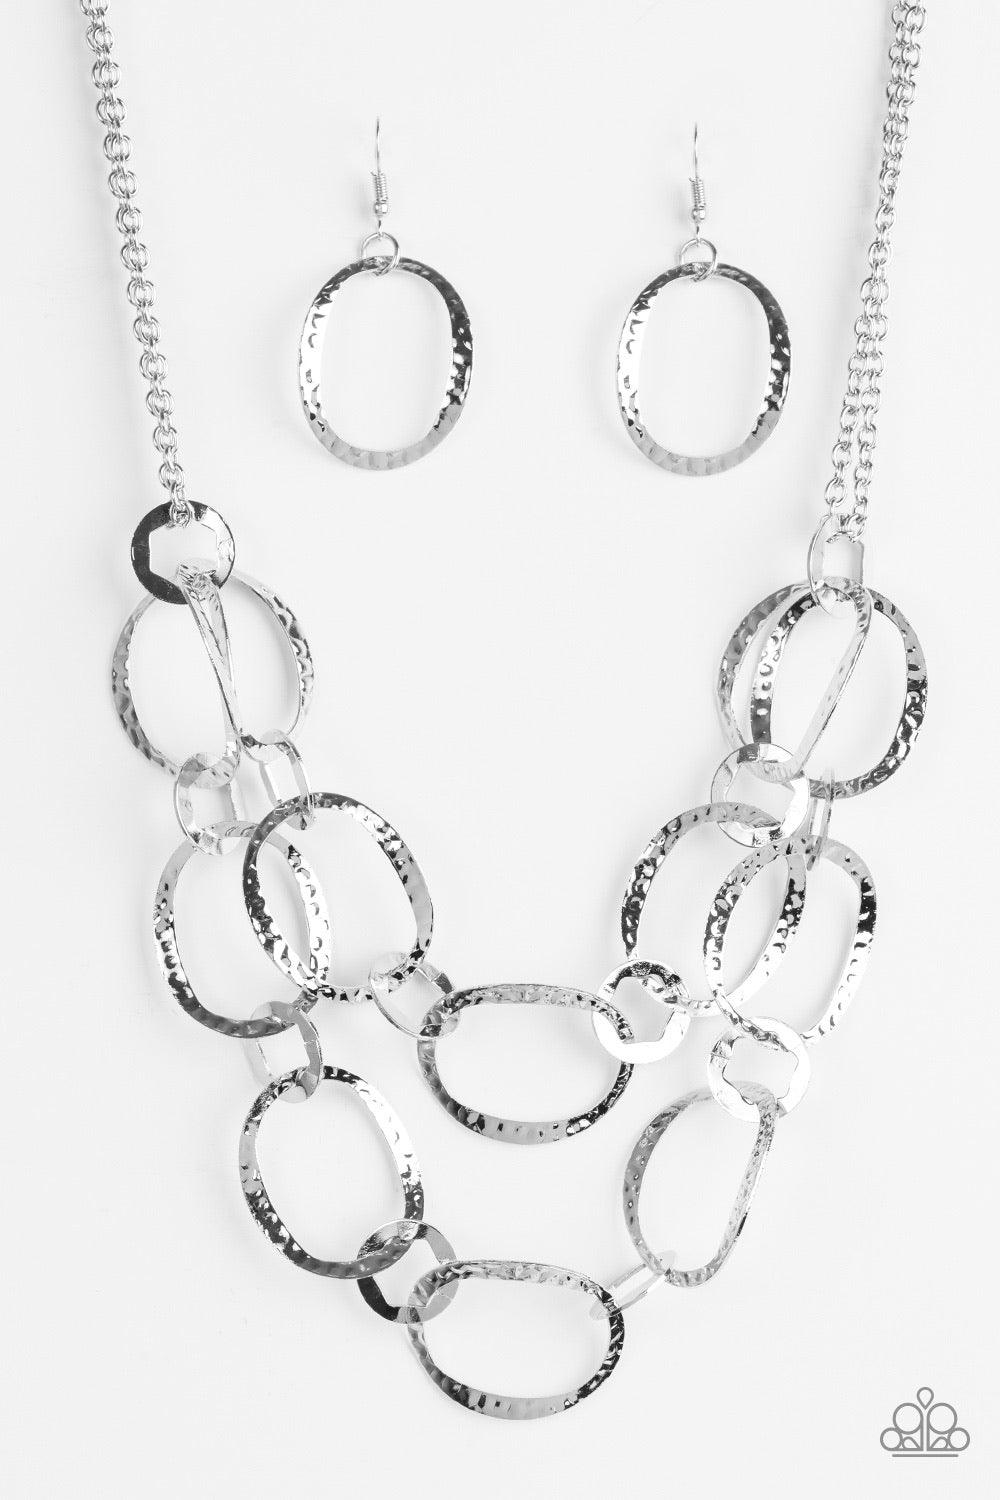 Paparazzi Accessories Circus Chic - Silver Featuring hexagonal centers, dainty silver rings link together two rows of hammered silver frames. The layered rows drape just below the collar for a refined look. Features an adjustable clasp closure. Sold as on